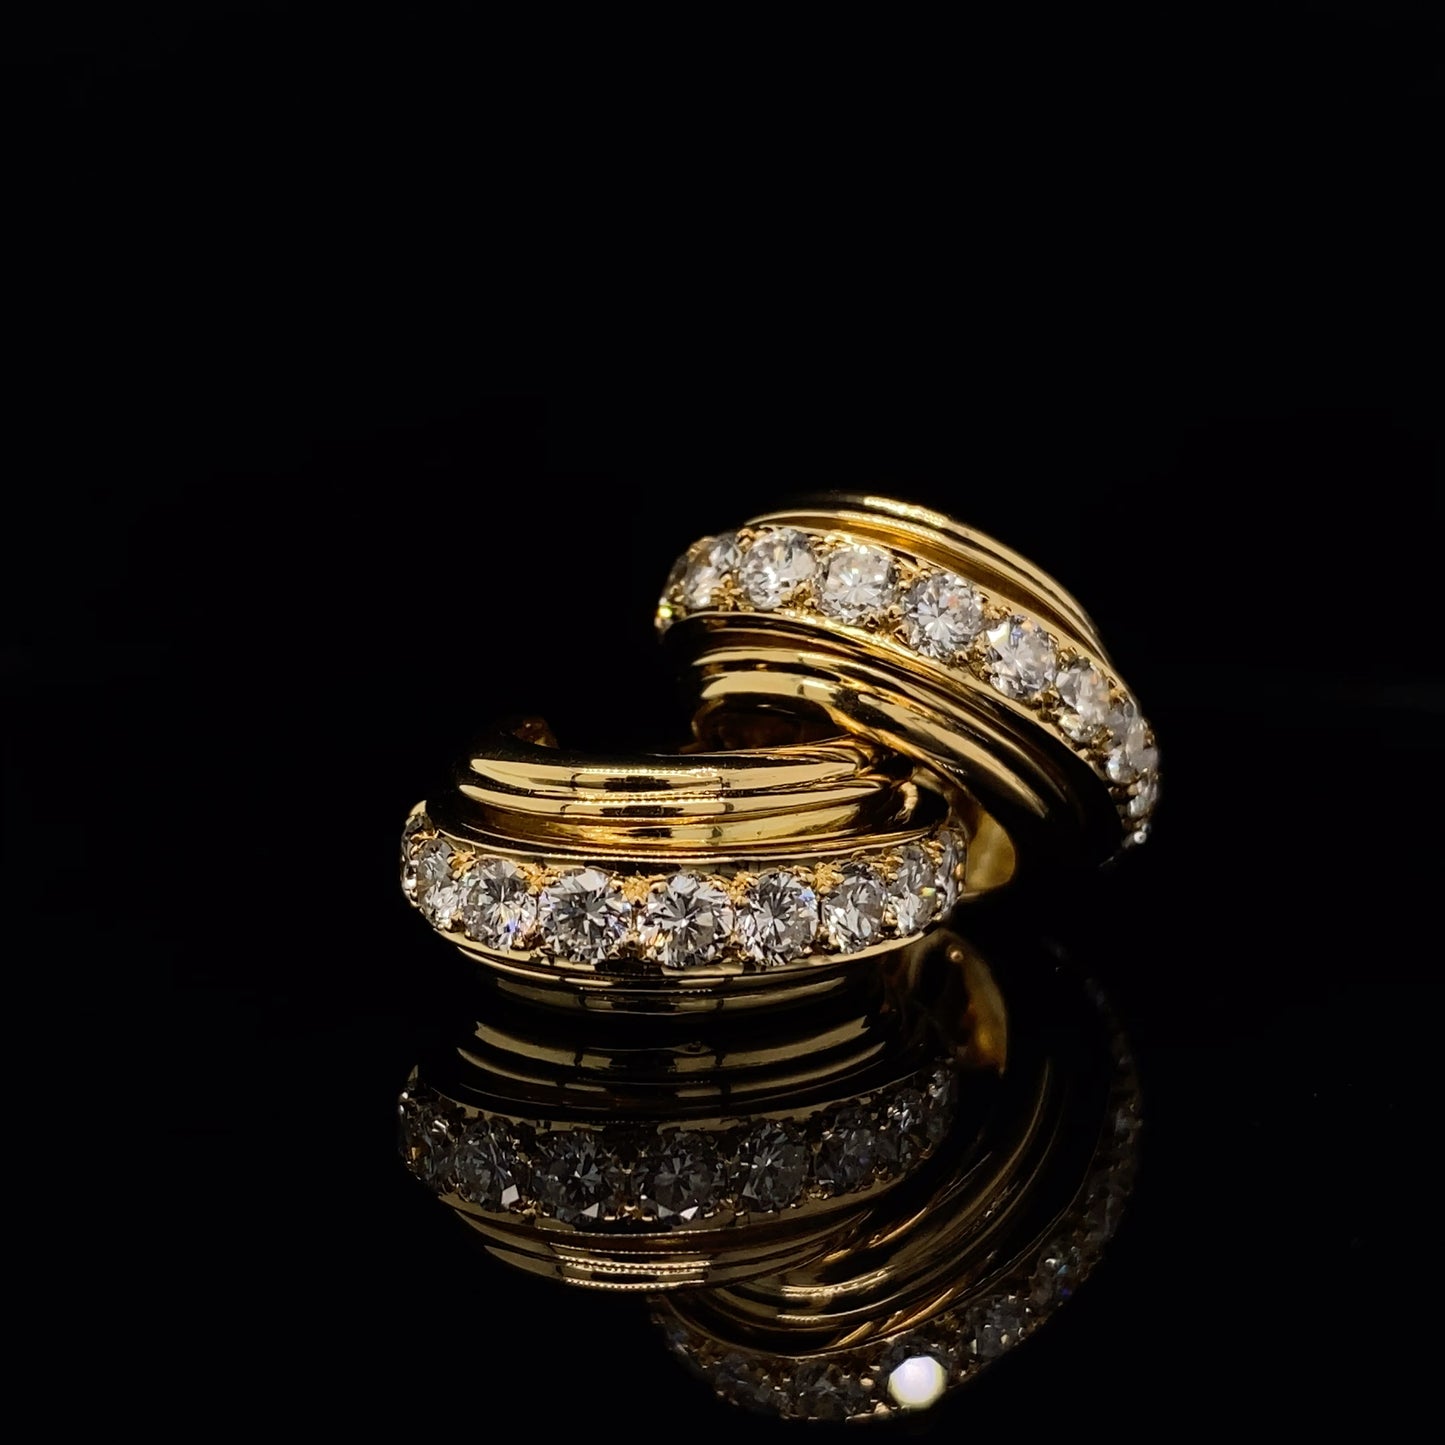 Piaget Possession creole earrings, yellow gold with 6 brilliant-cut diamonds